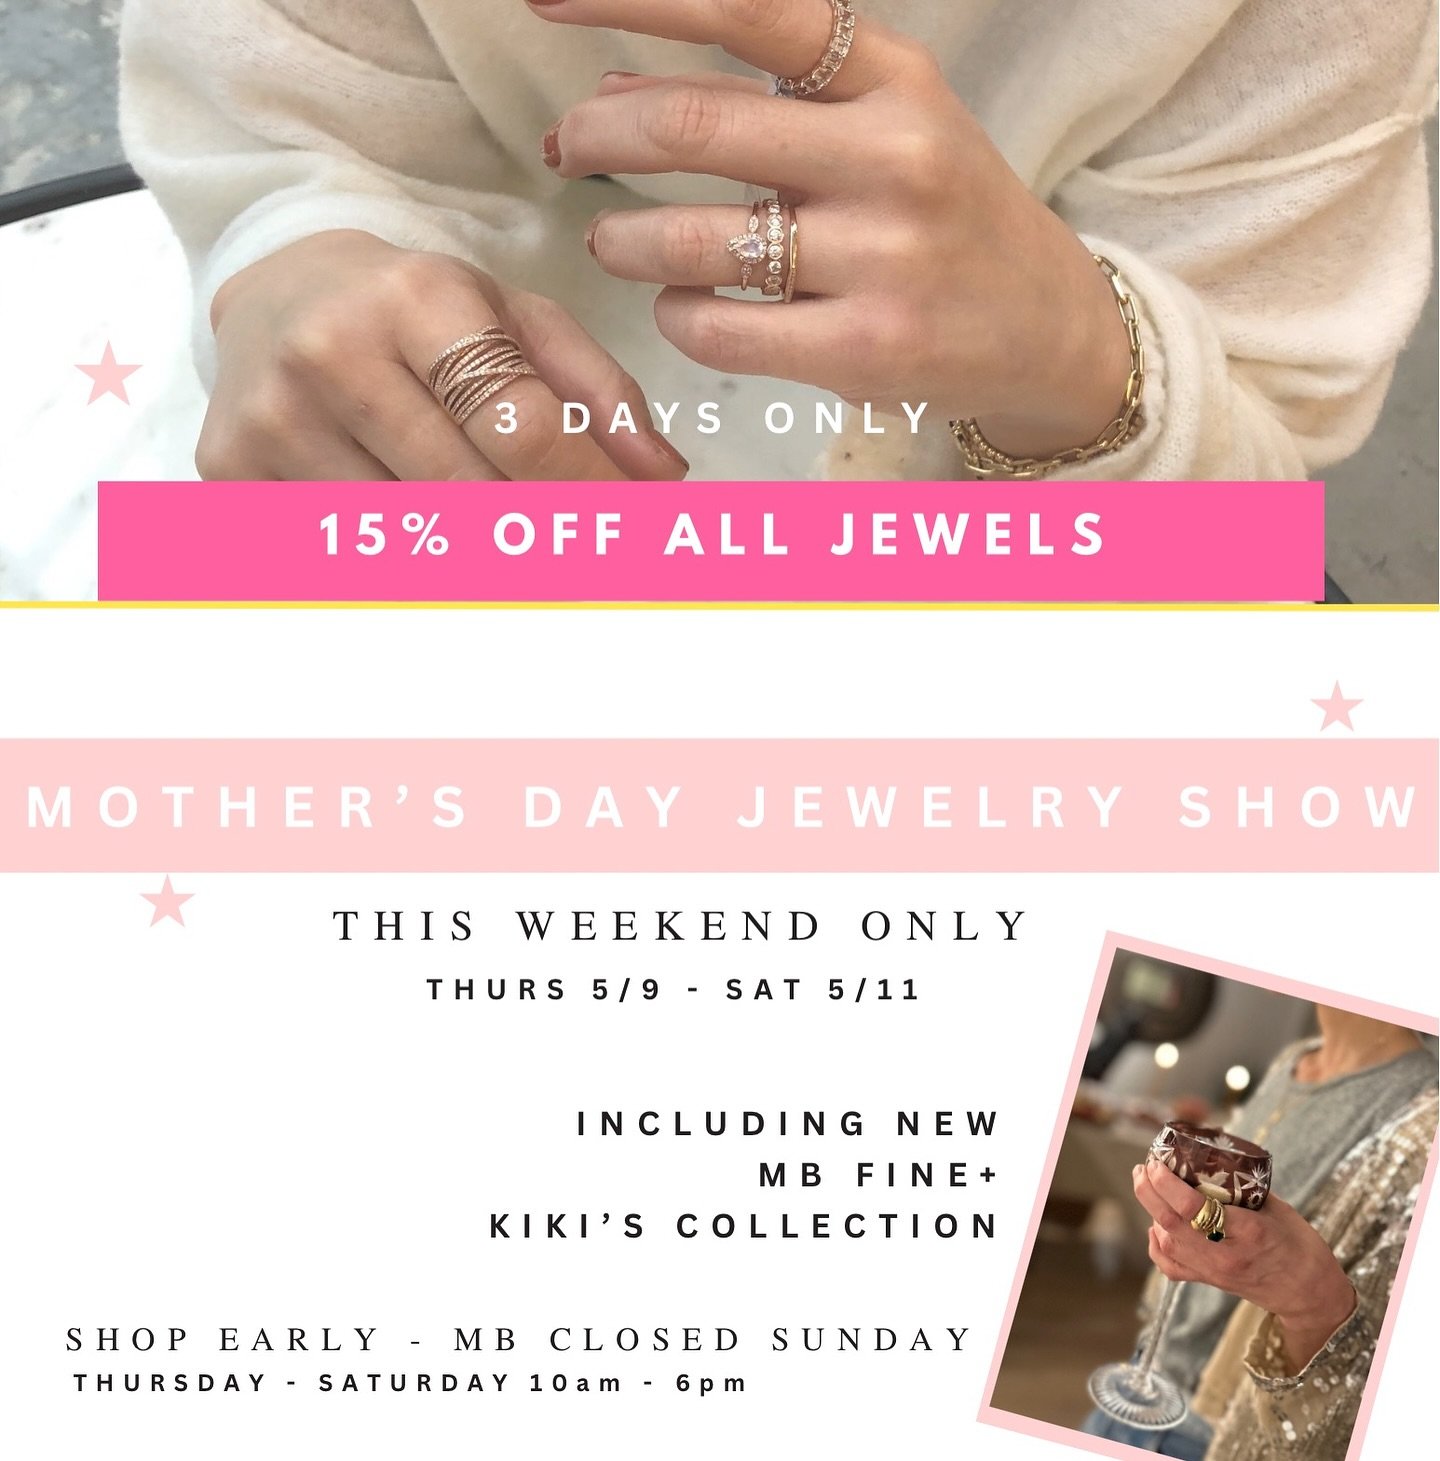 MB 💛 moms + moms 💛 jewels 

✨15% off ALL JEWELRY ✨
This Thursday - Saturday 
including our newest #MBFine + Kiki&rsquo;s collection